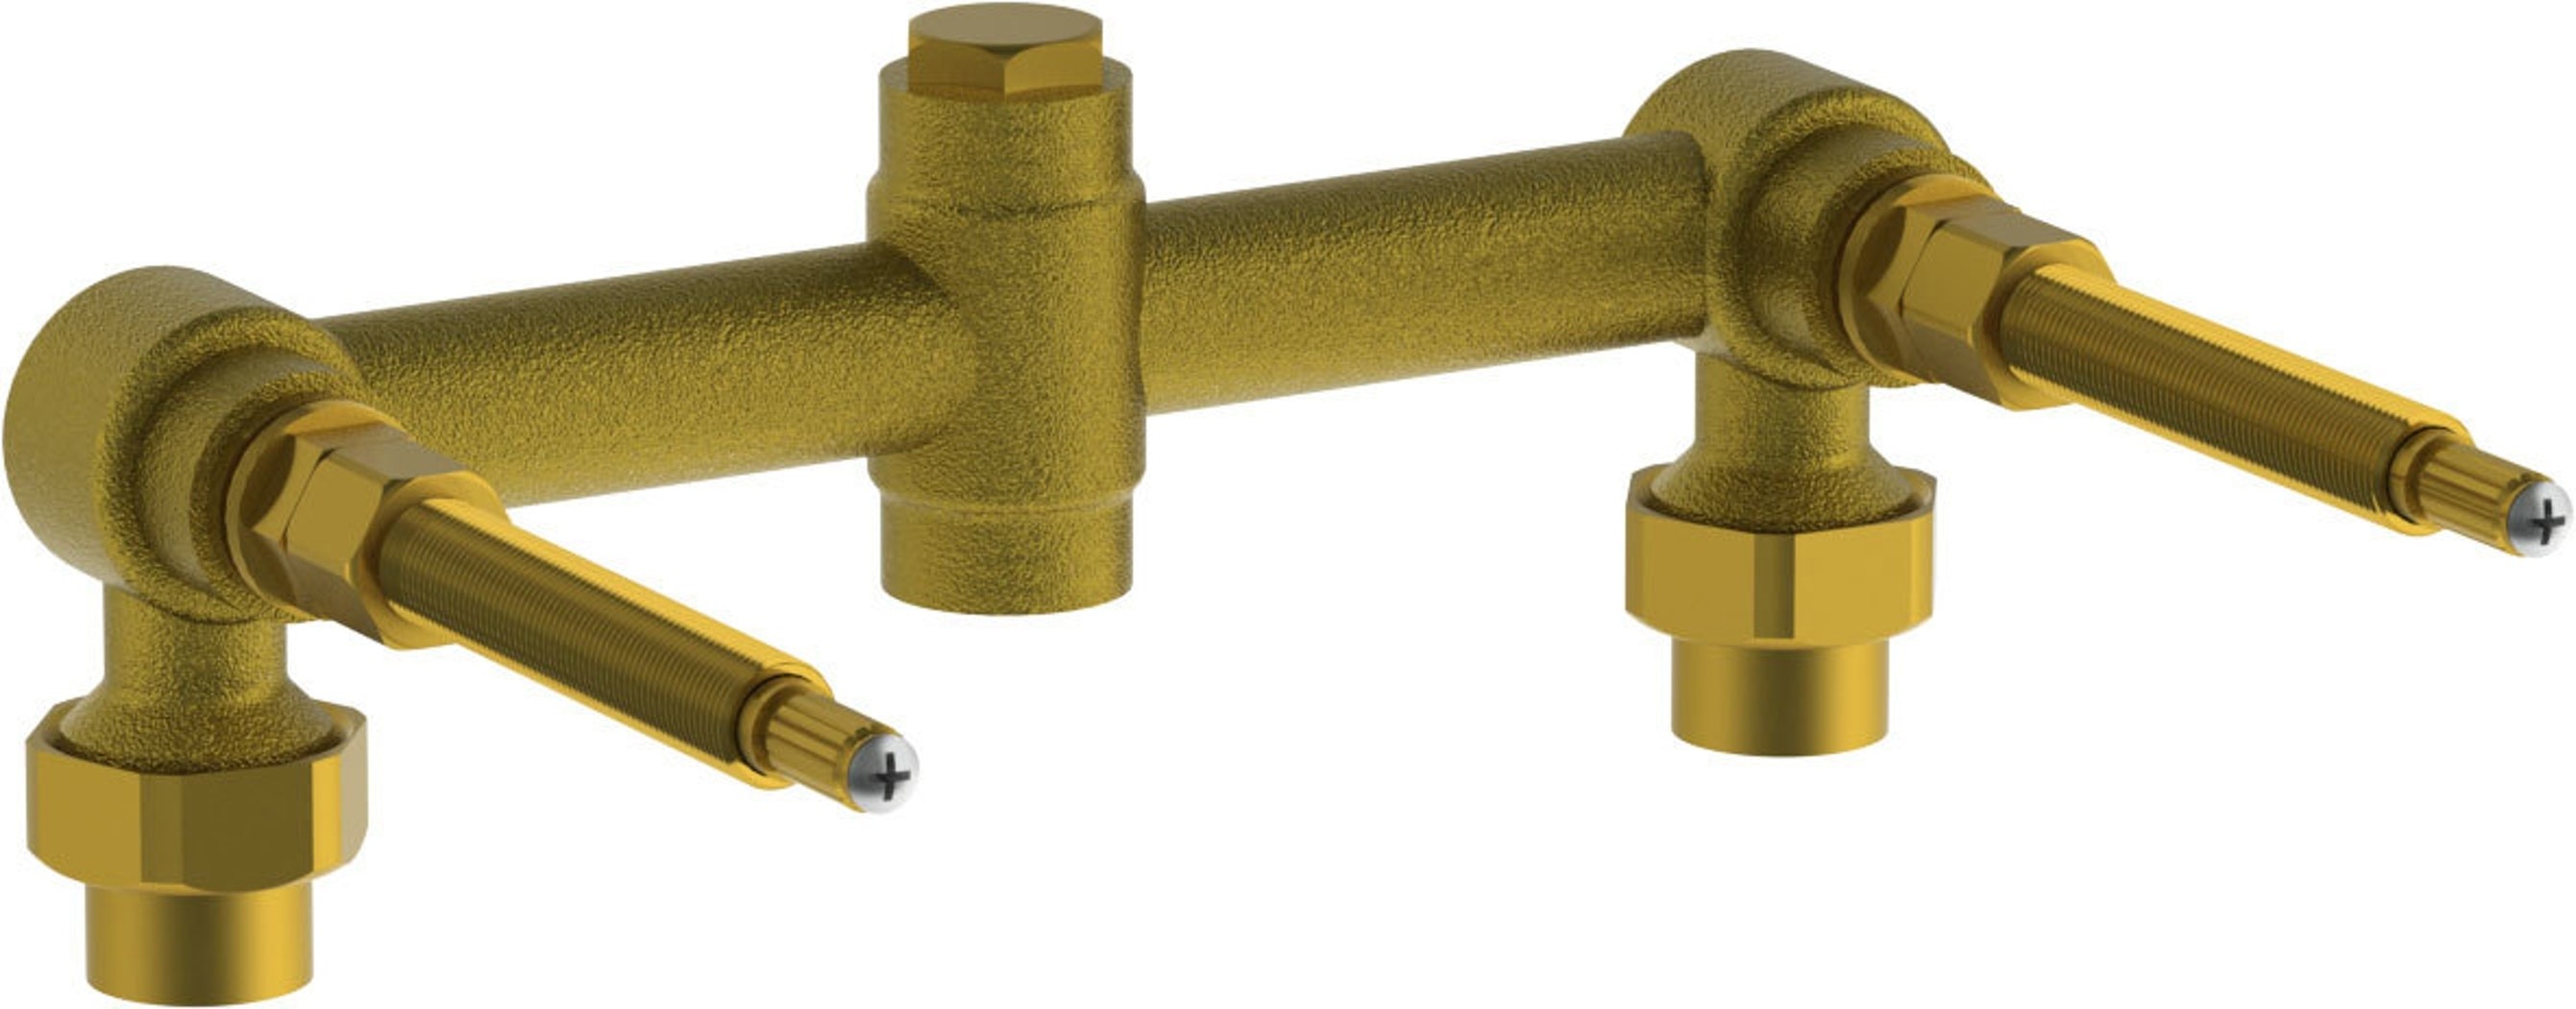 WATERMARK SS-506 9 1/2 INCH TWO VALVE SHOWER ROUGH